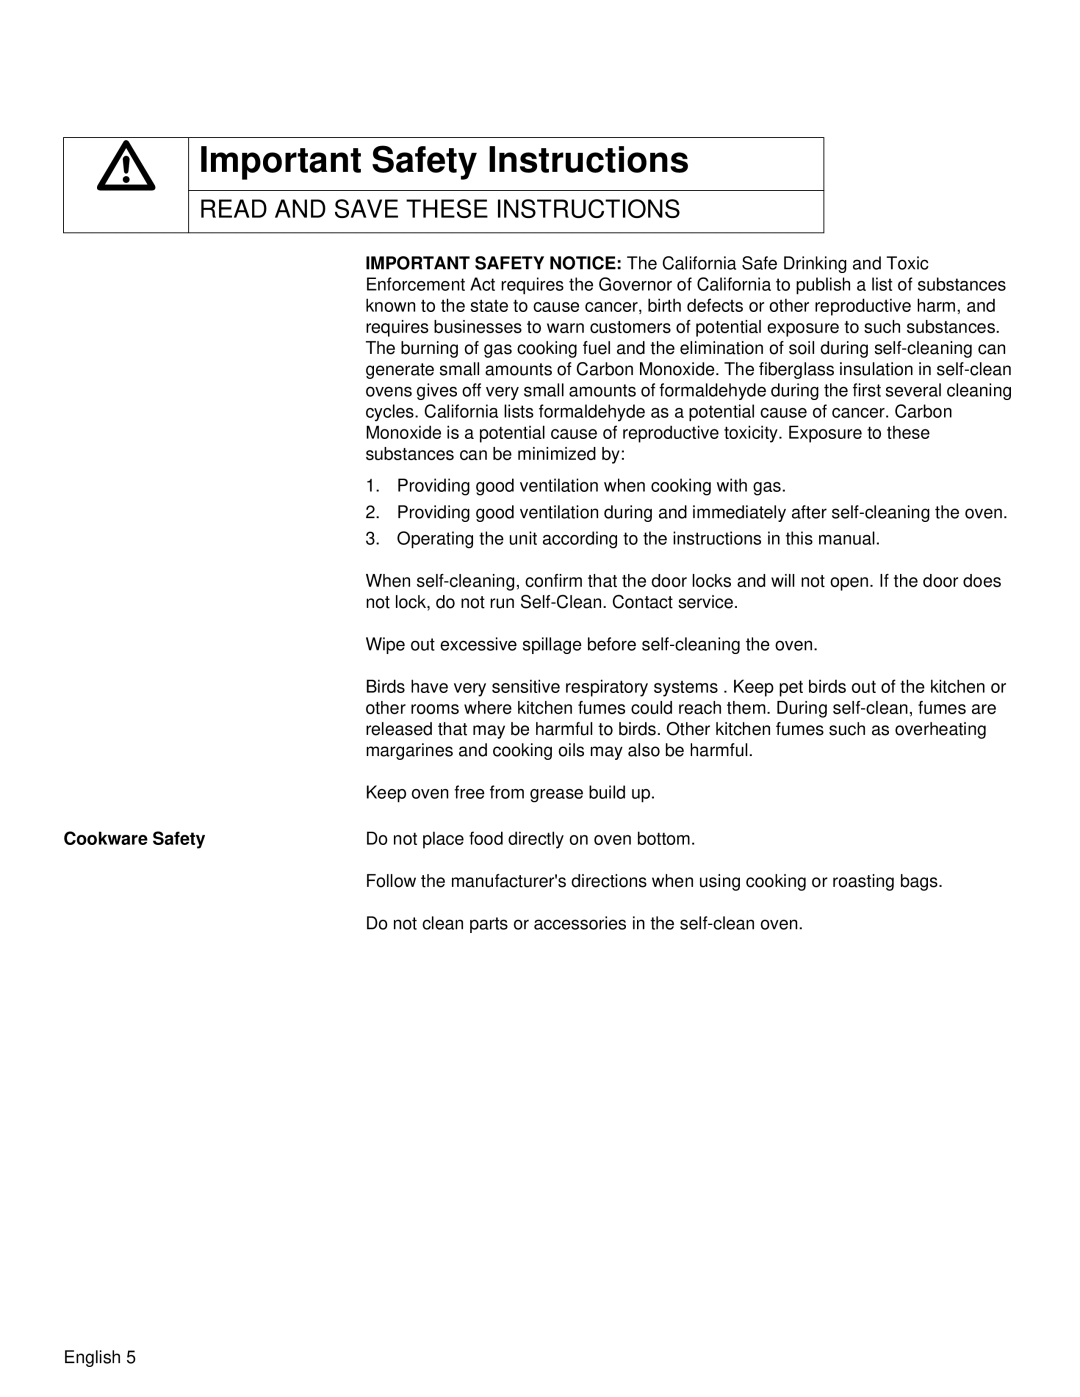 Siemens HB30D51UC, HB30S51UC manual Important Safety Instructions, Read And Save These Instructions, Cookware Safety 